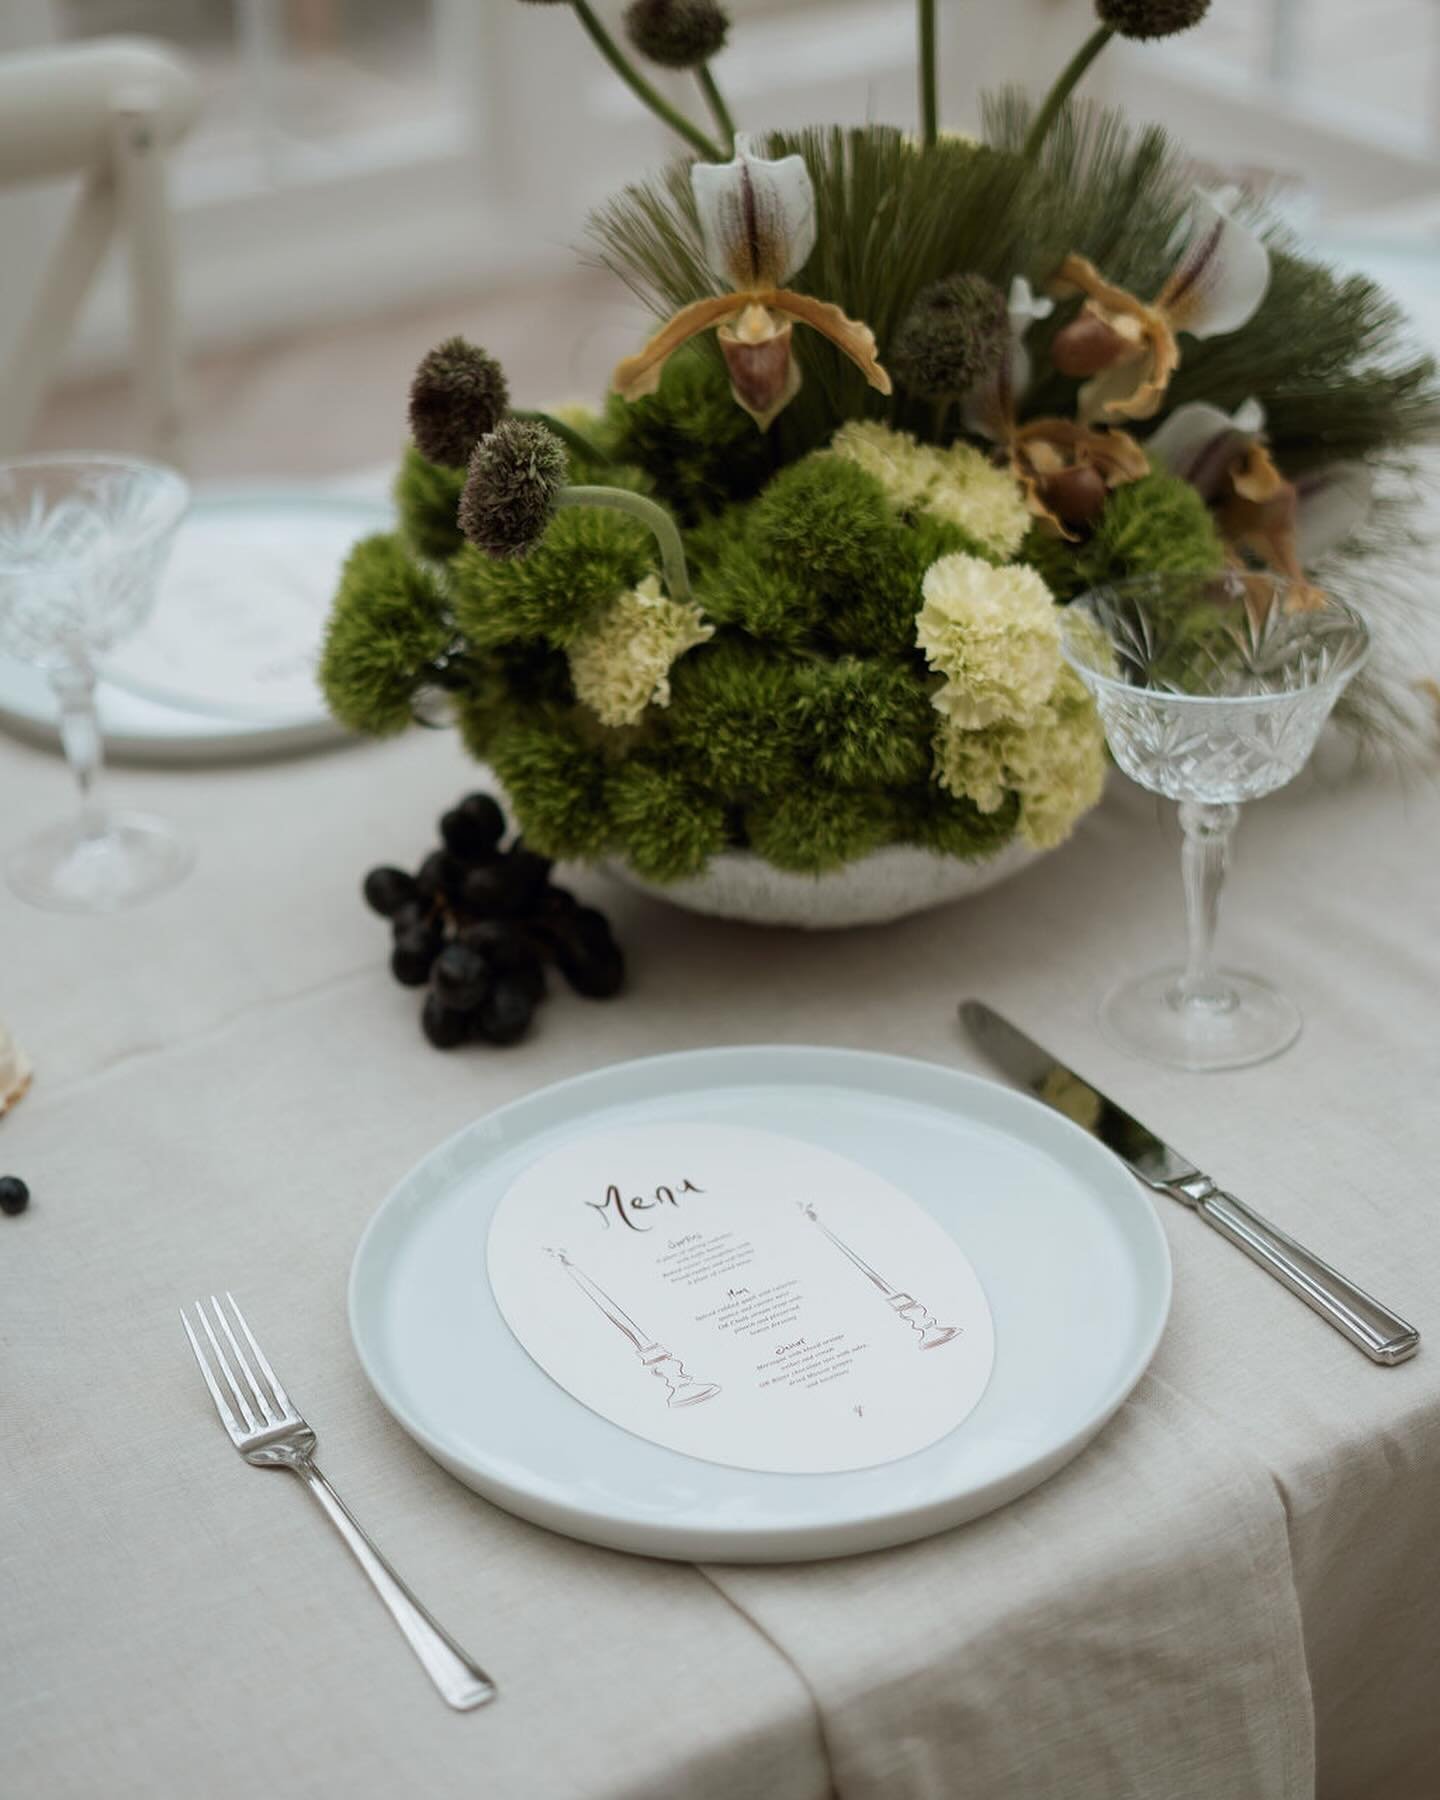 this set up in all its glory 

ugh there is something so satisfying about simple, clean table design combined with unique + dynamic florals. 

to anyone thinking about their wedding design and how they want it to look, there are SO many design option